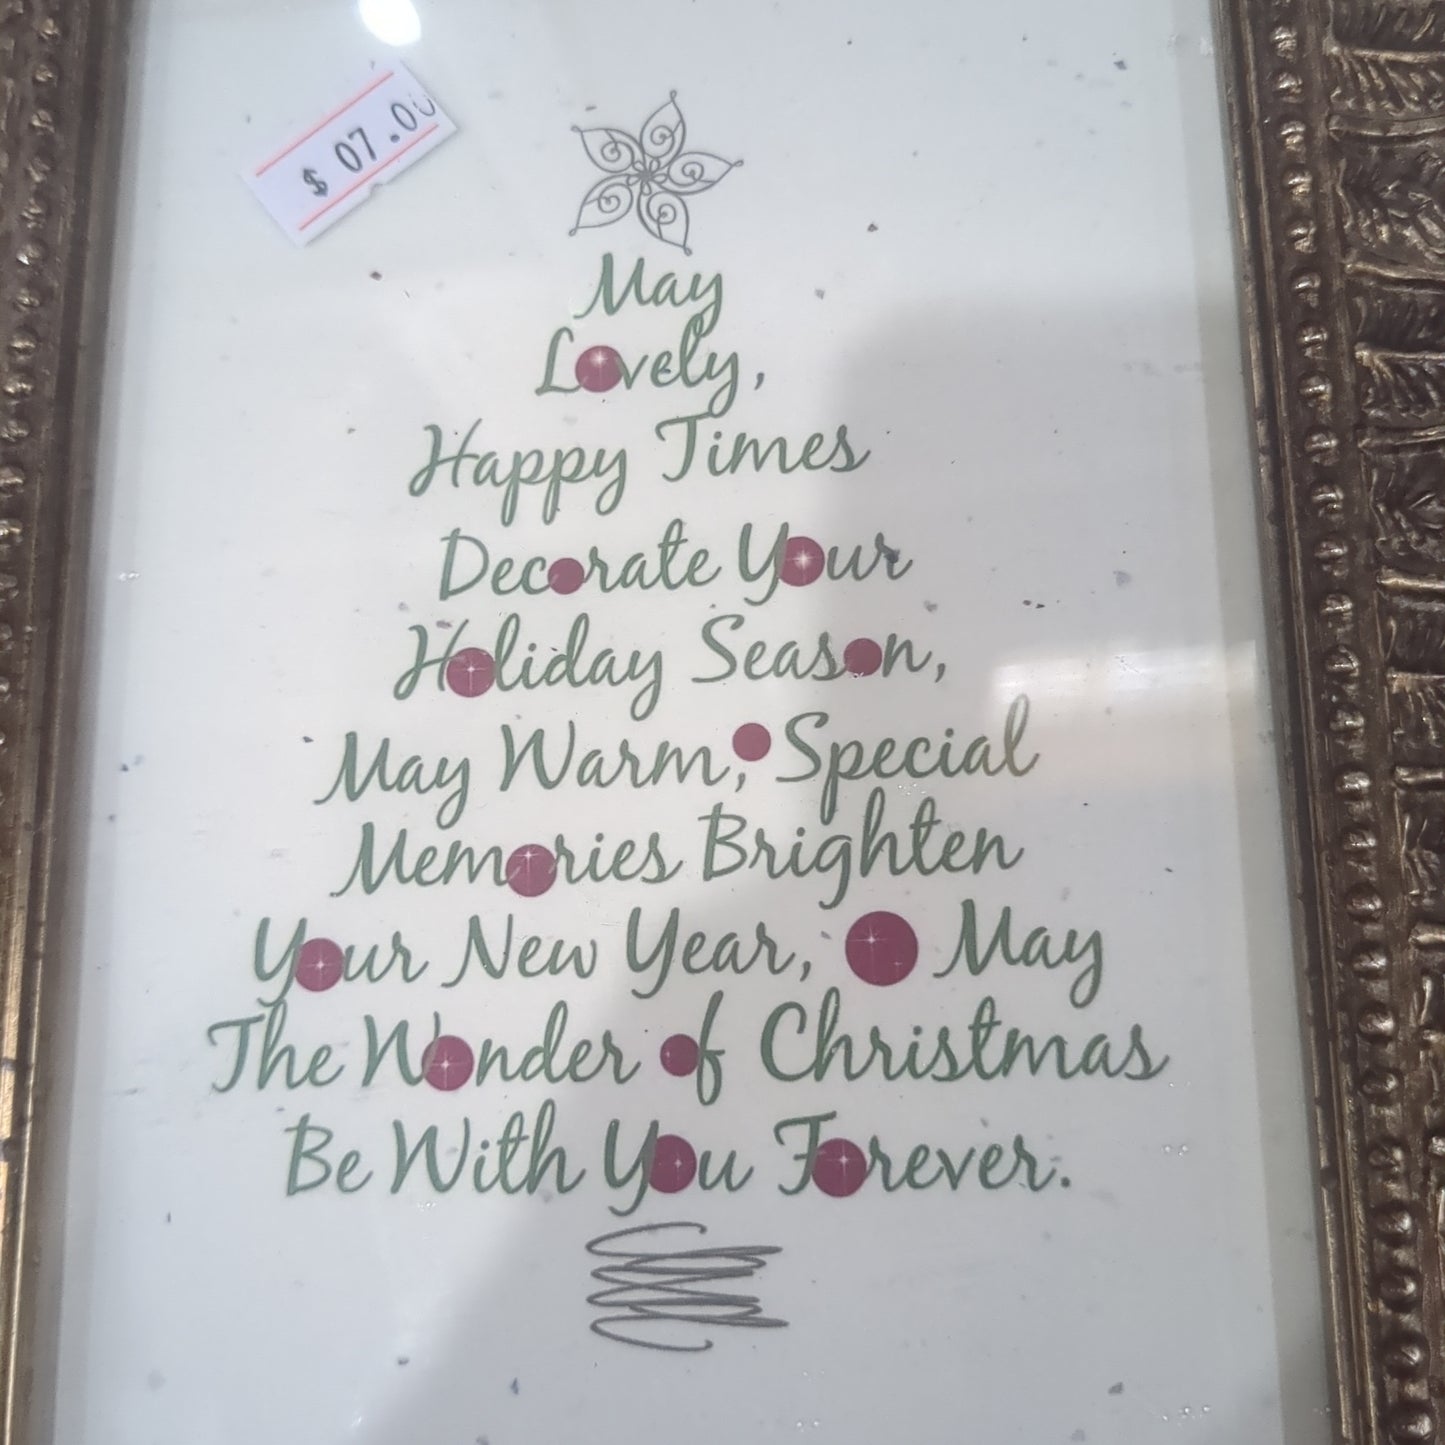 Unique Christmas saying framed